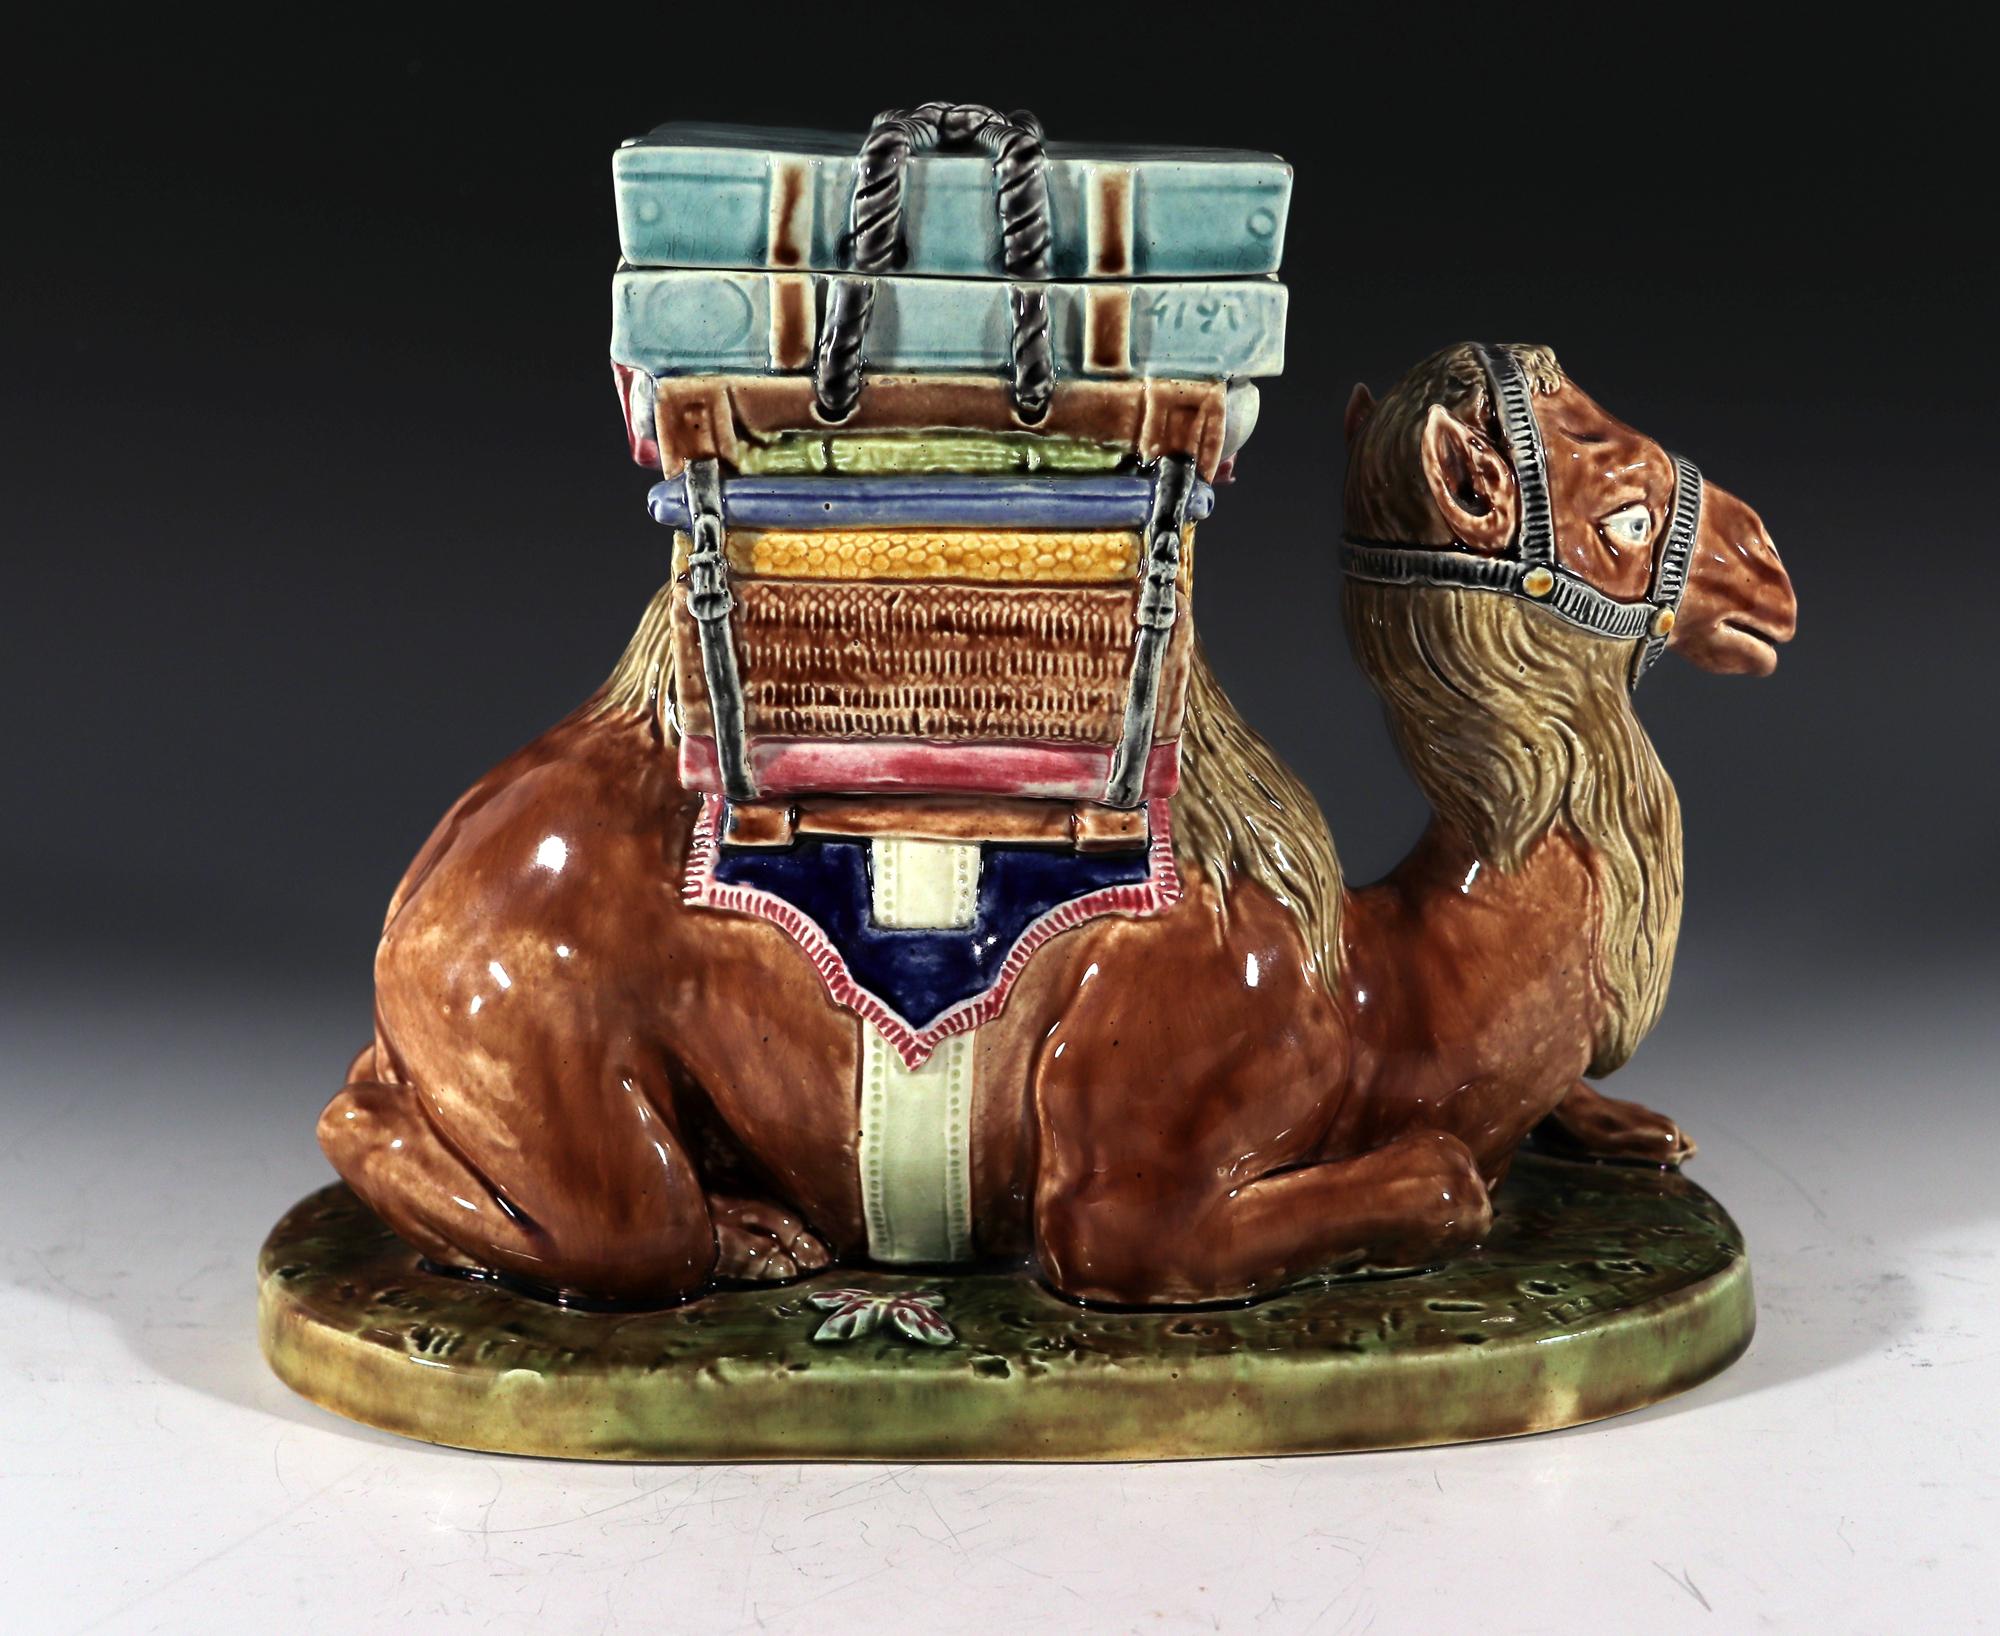 French Majolica Camel-form Lidded Box,
St. Amand,
circa 1870

The French majolica box is in the form of a seated, naturalistically colored, camel on a raised mottled green ground. On its back is a loaded pack filled with different packed goods.